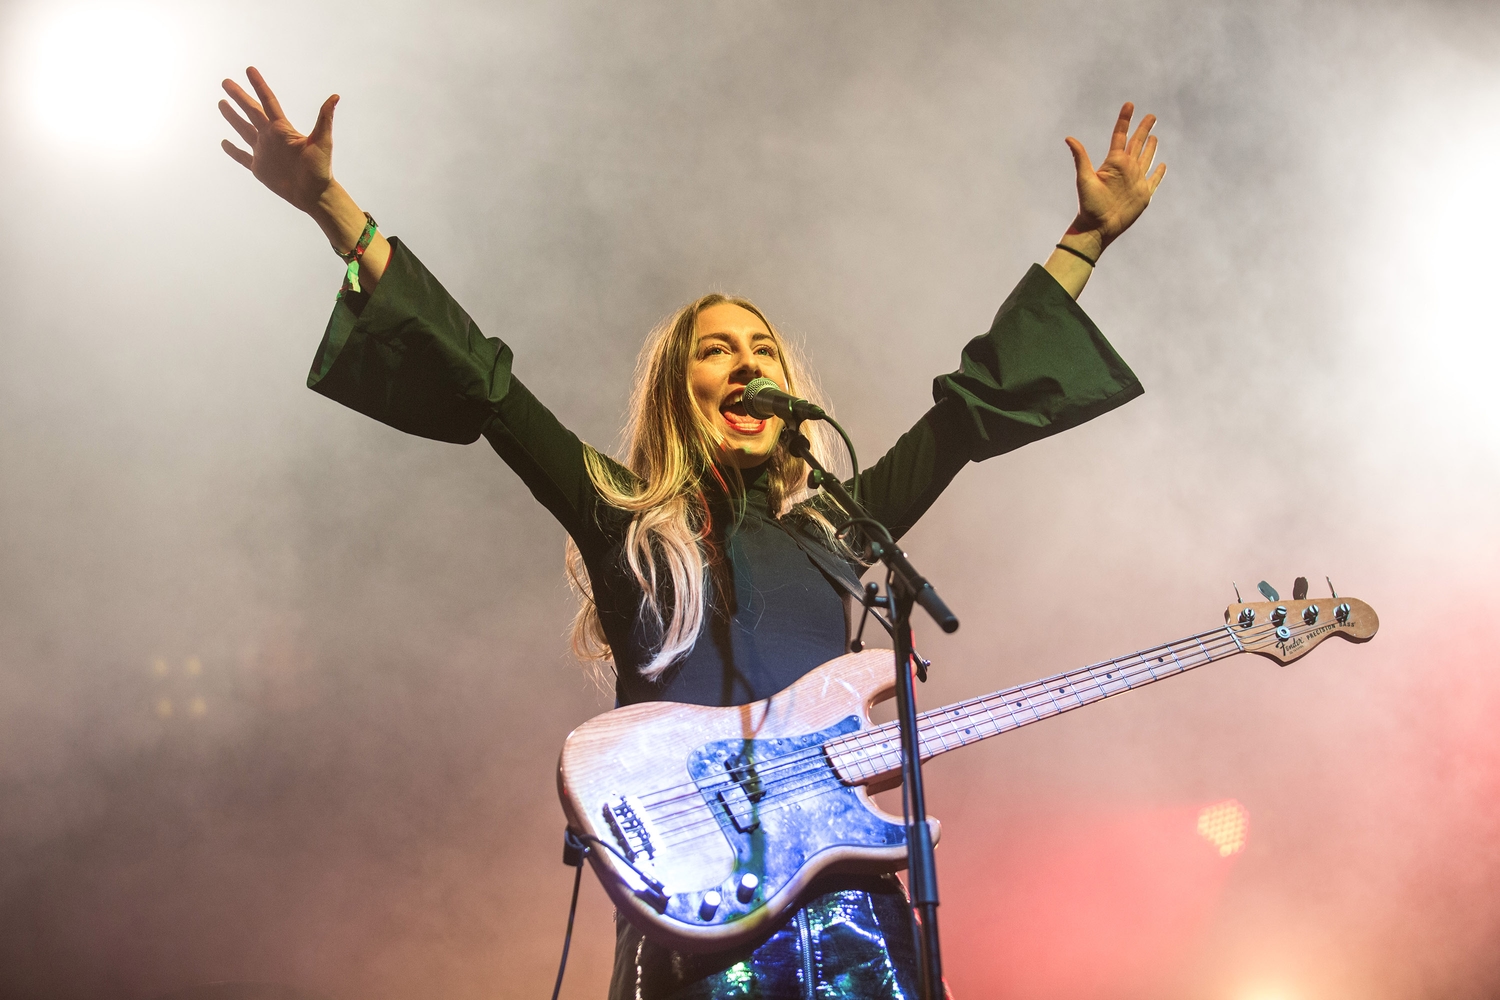 HAIM, Parcels, Anderson.Paak and more added to NOS Alive 2020 lineup